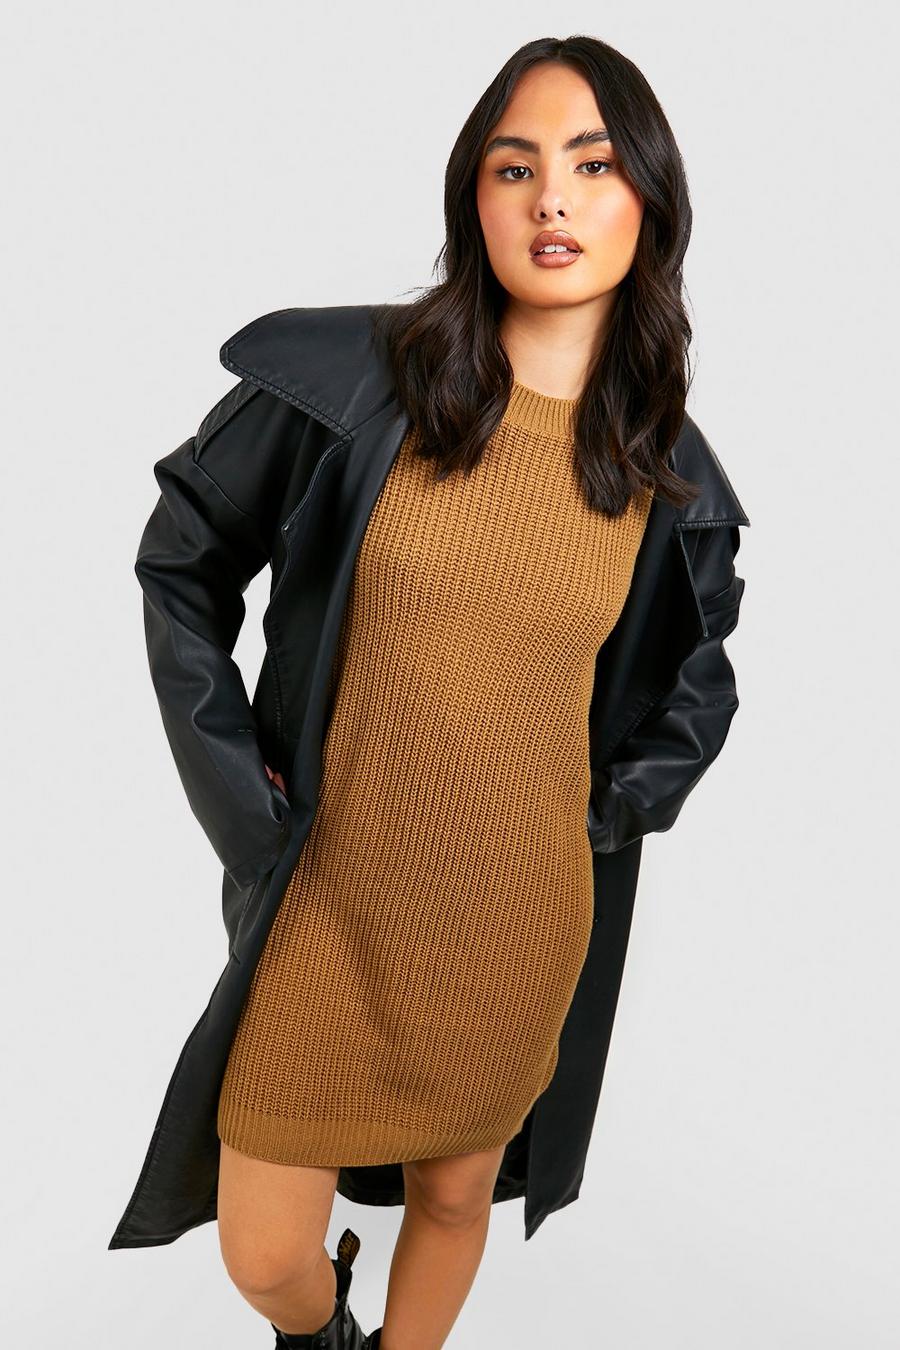 Missguided Tall sweater dress with side split in camel